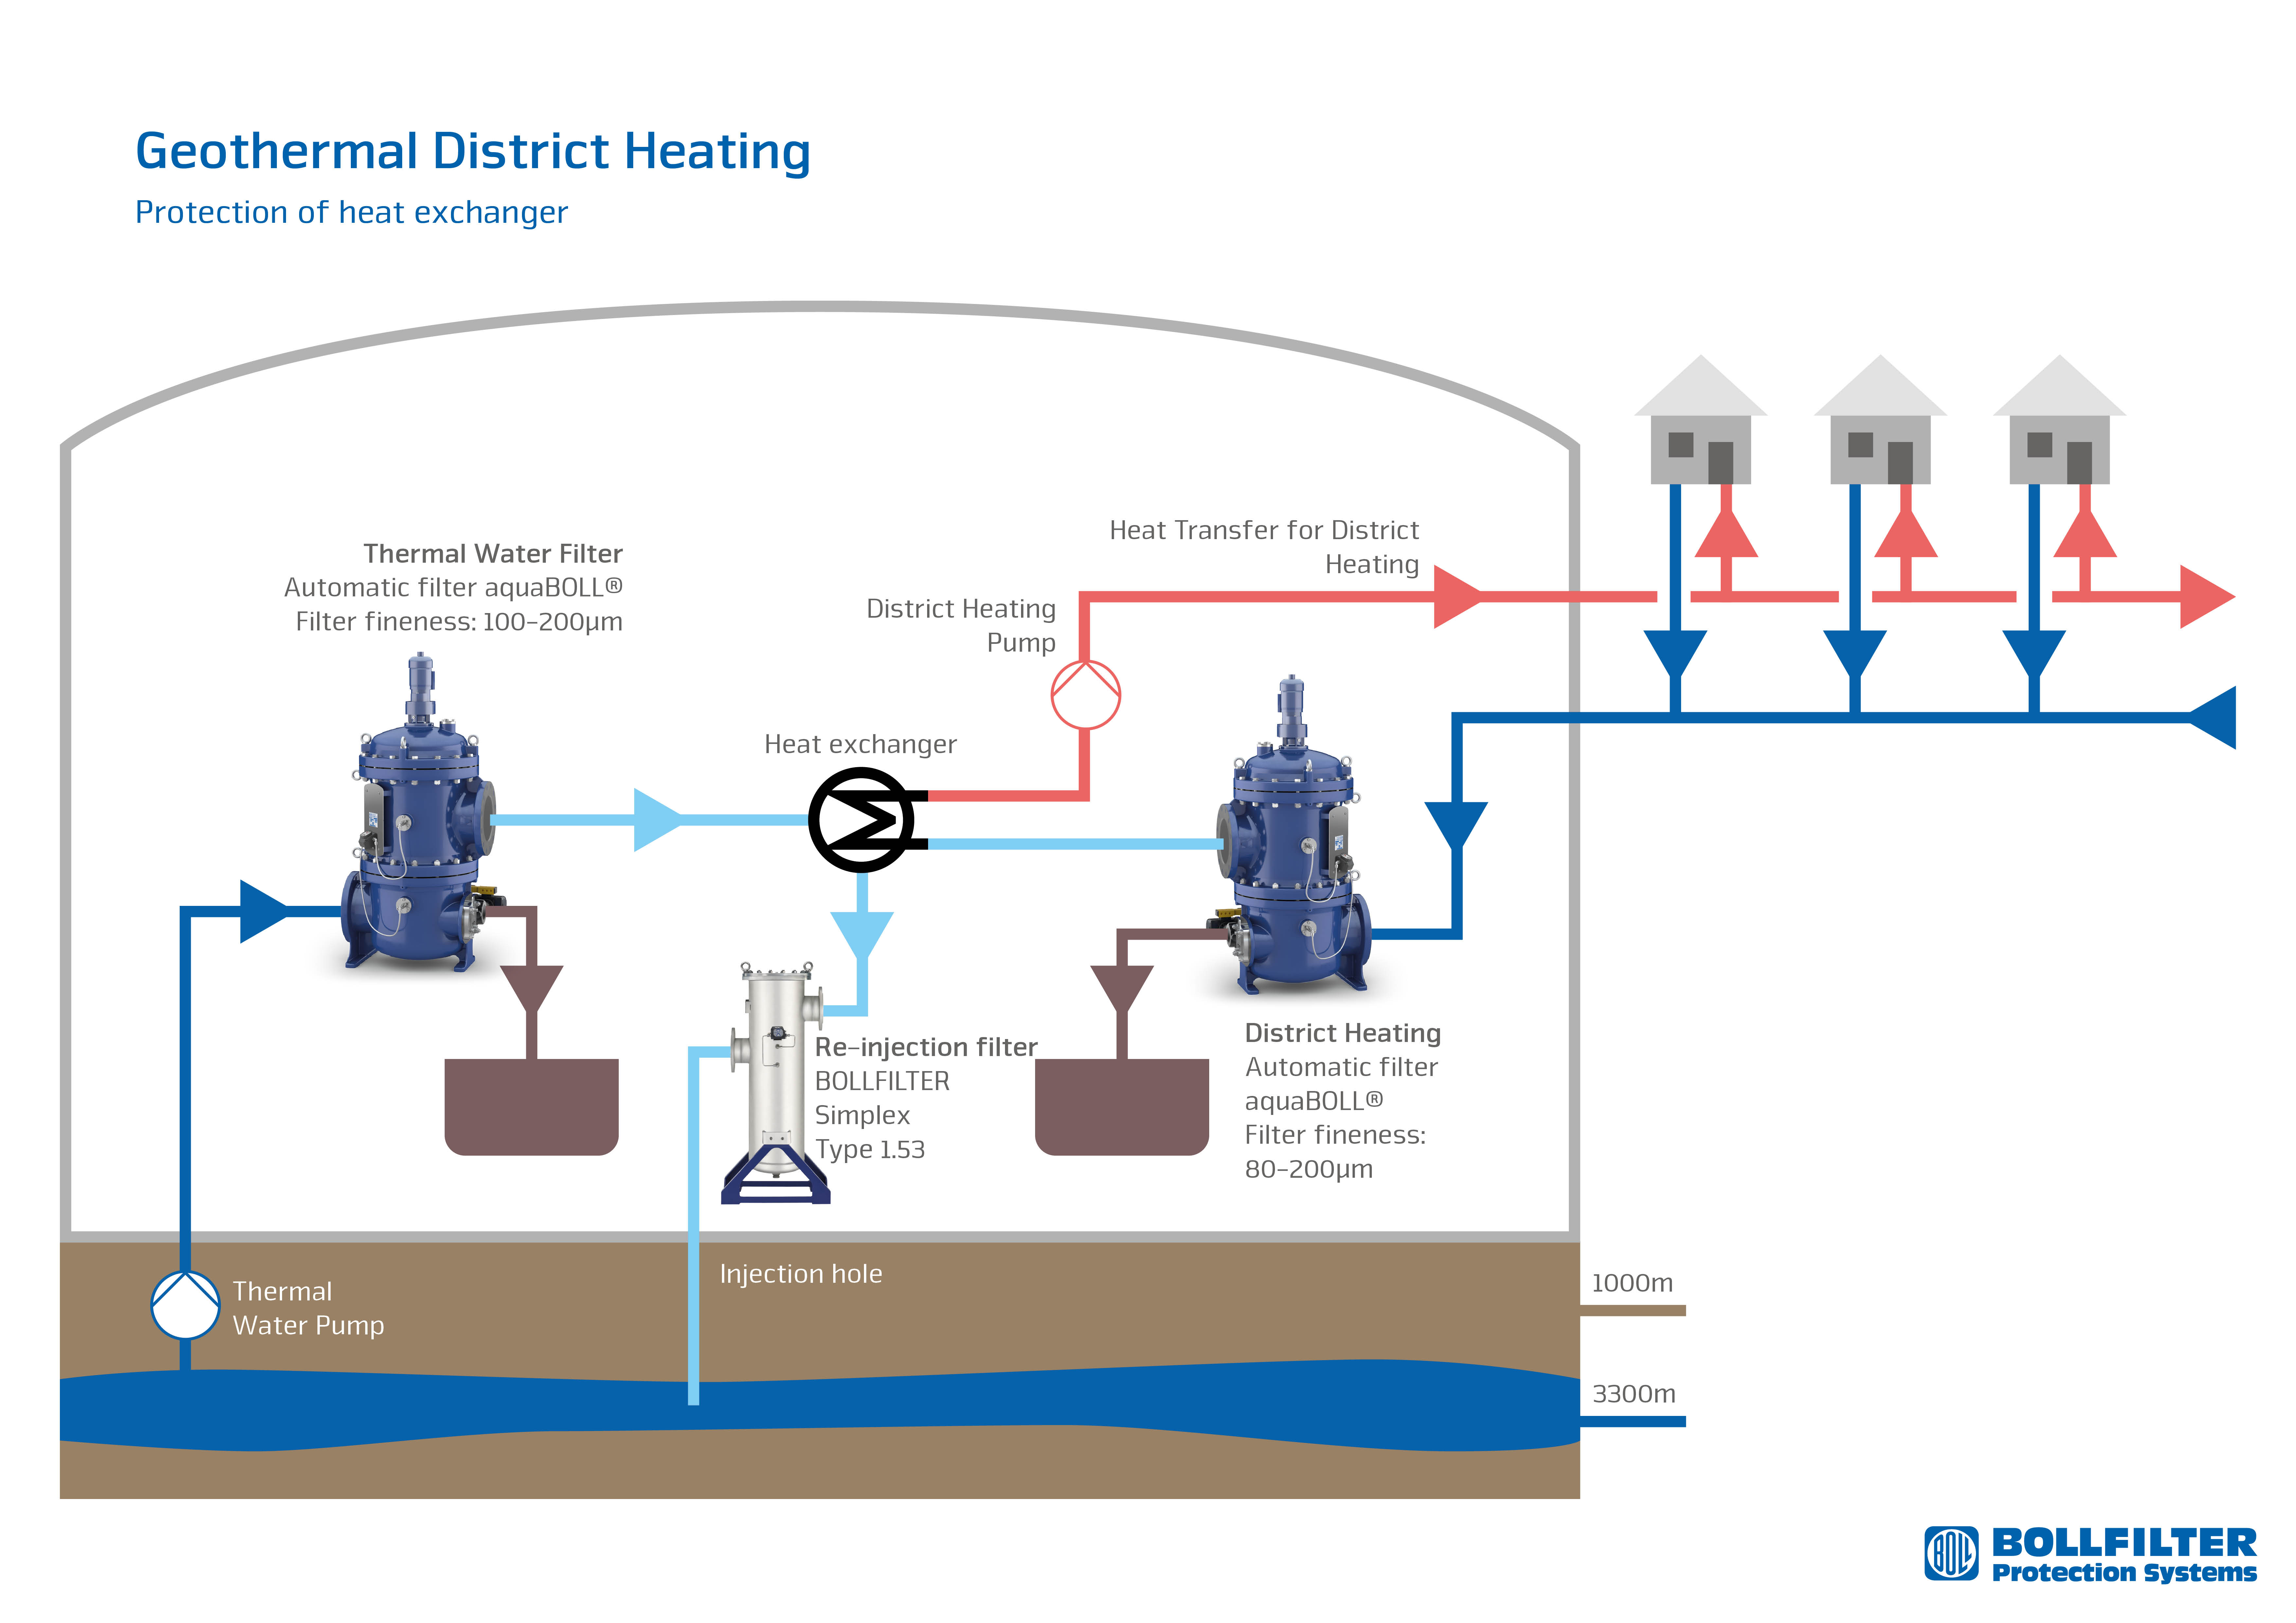 Filtration solutions for geothermal energy